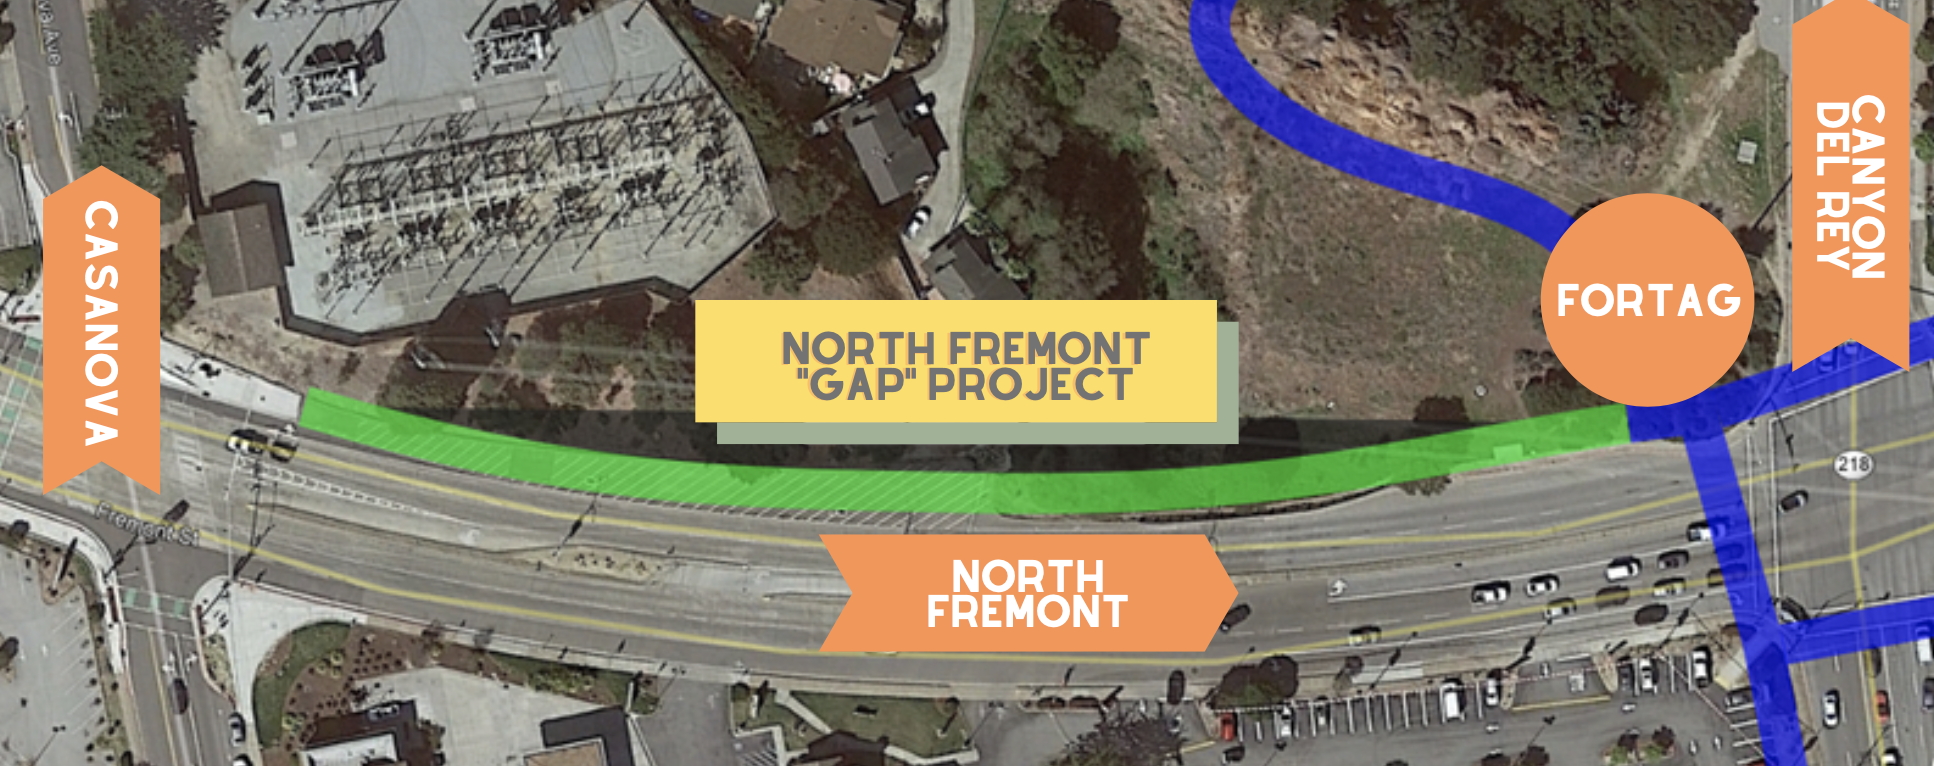 North Fremont Gap Project Map